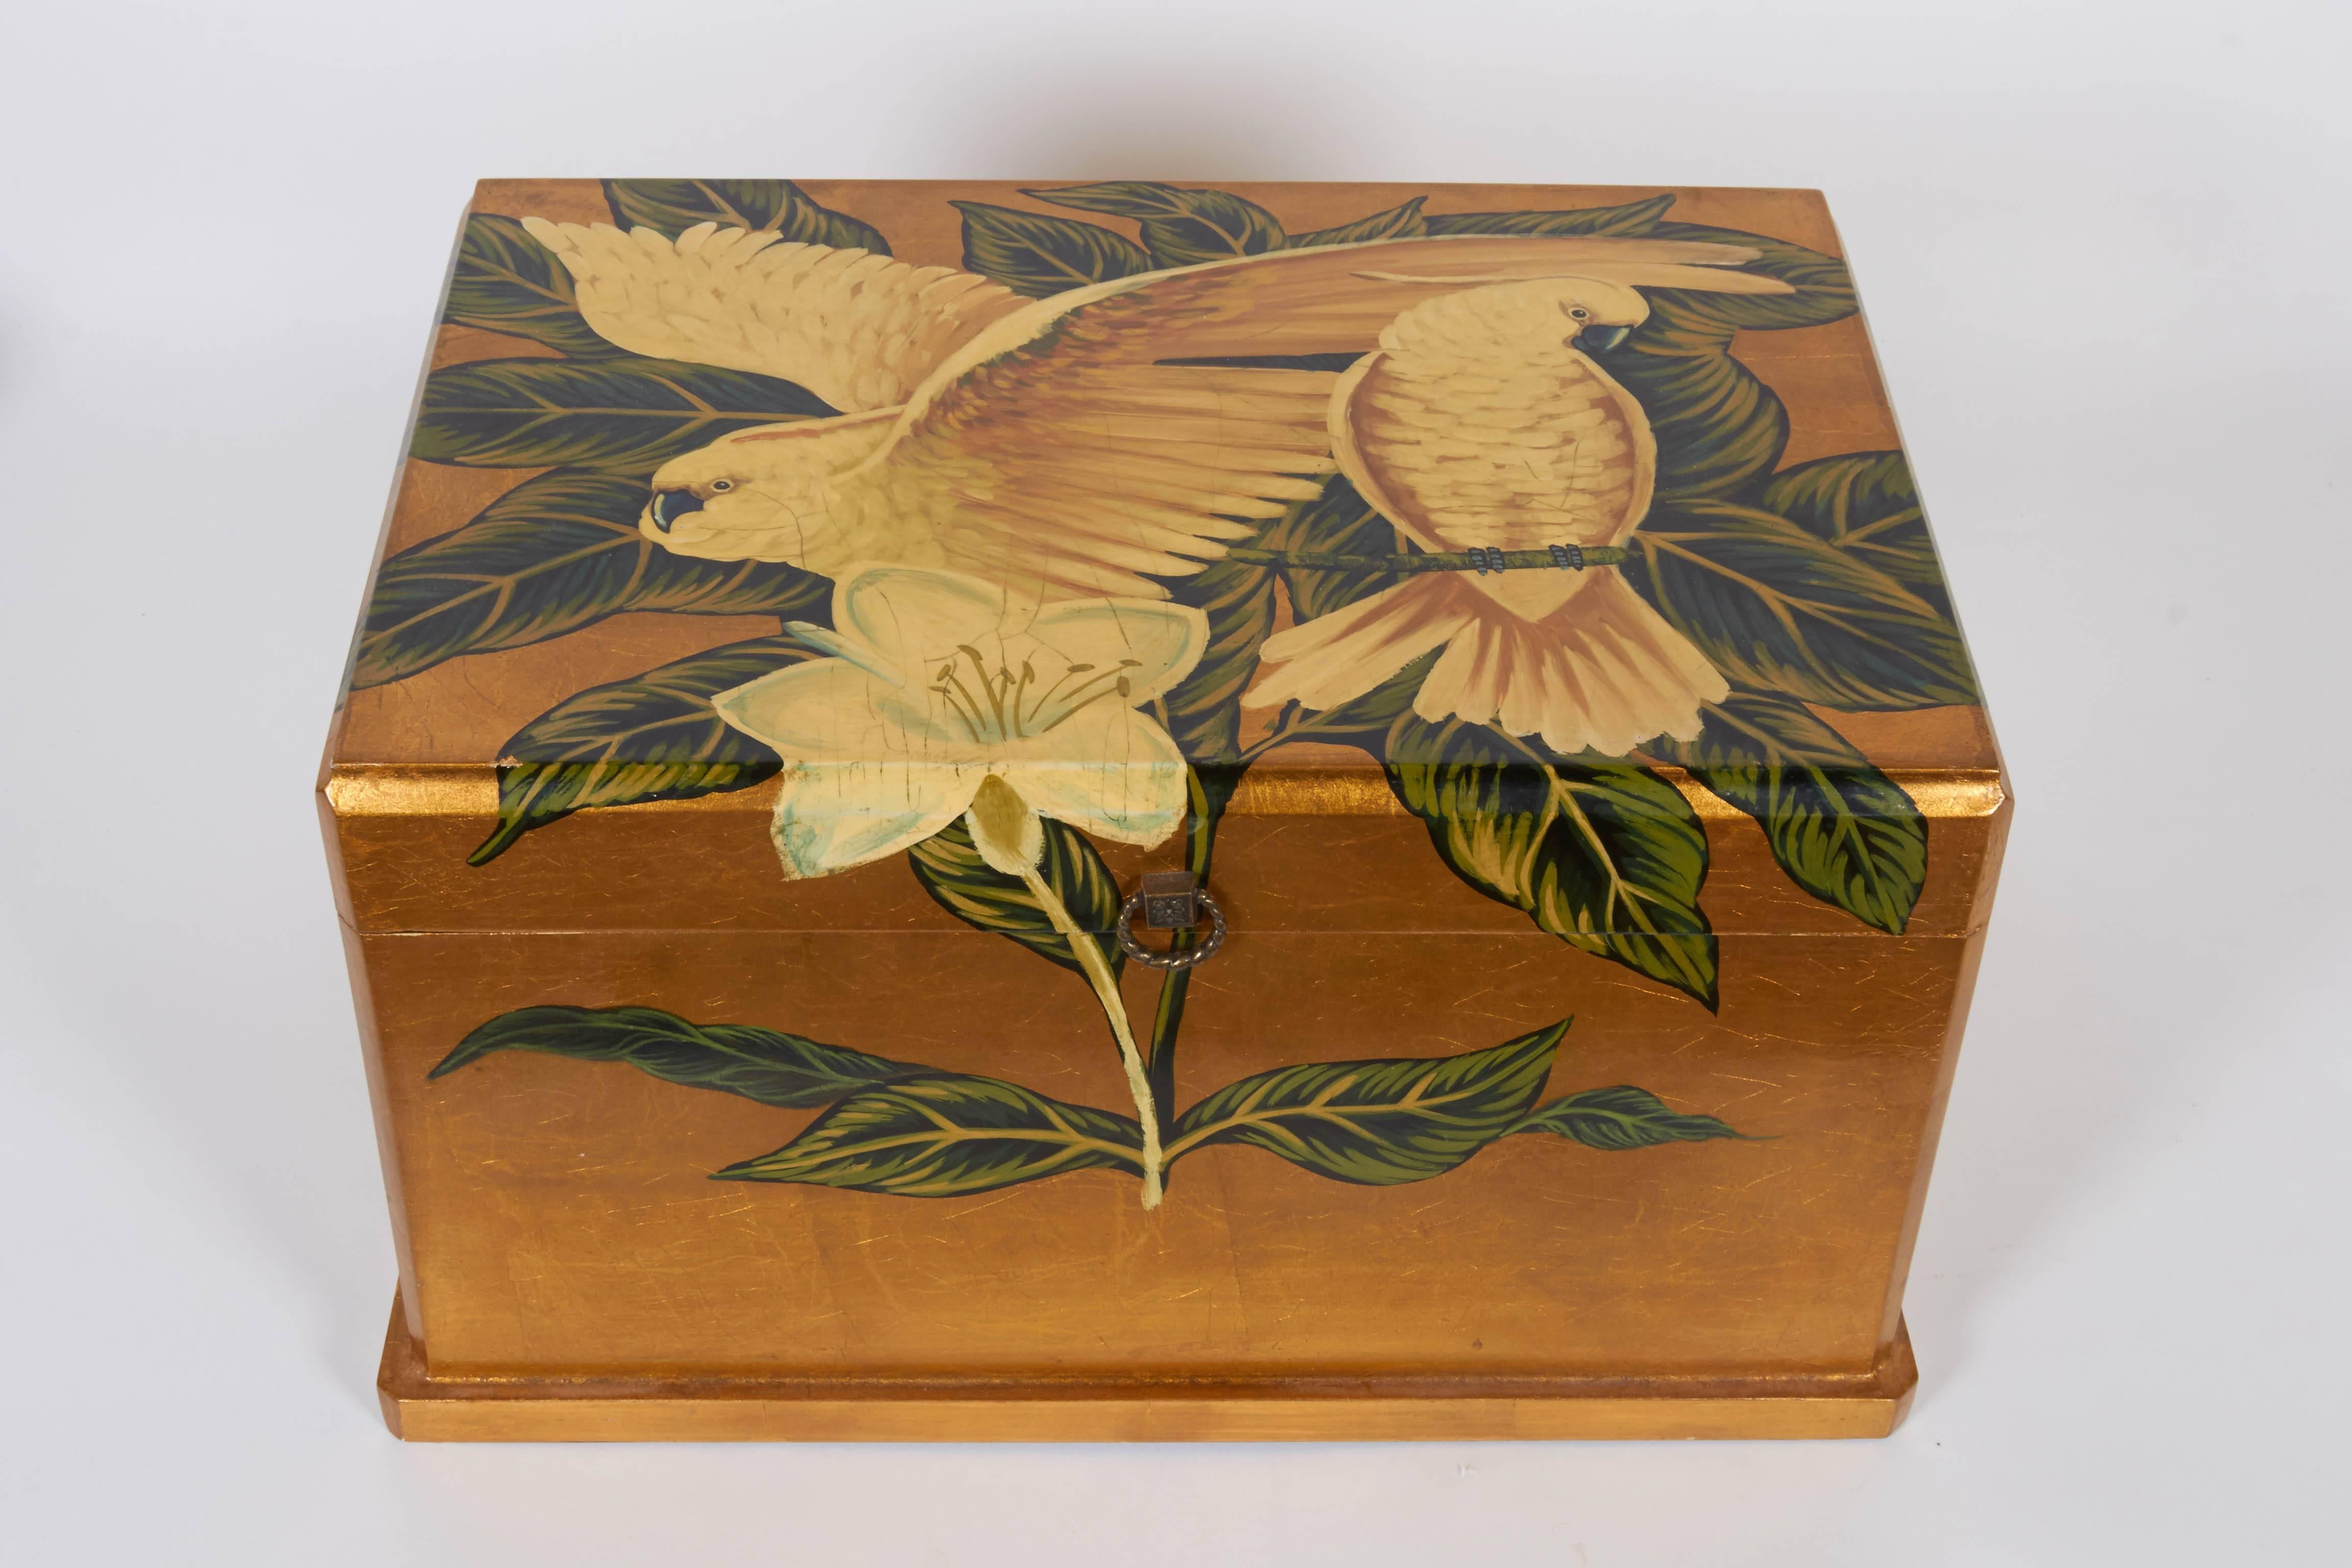 A Mid-Century era lacquered gold leaf jewelry box with hinged top, hand-painted decoration with cockatoos among foliage. Very good vintage condition, wear consistent with age and use.

11078